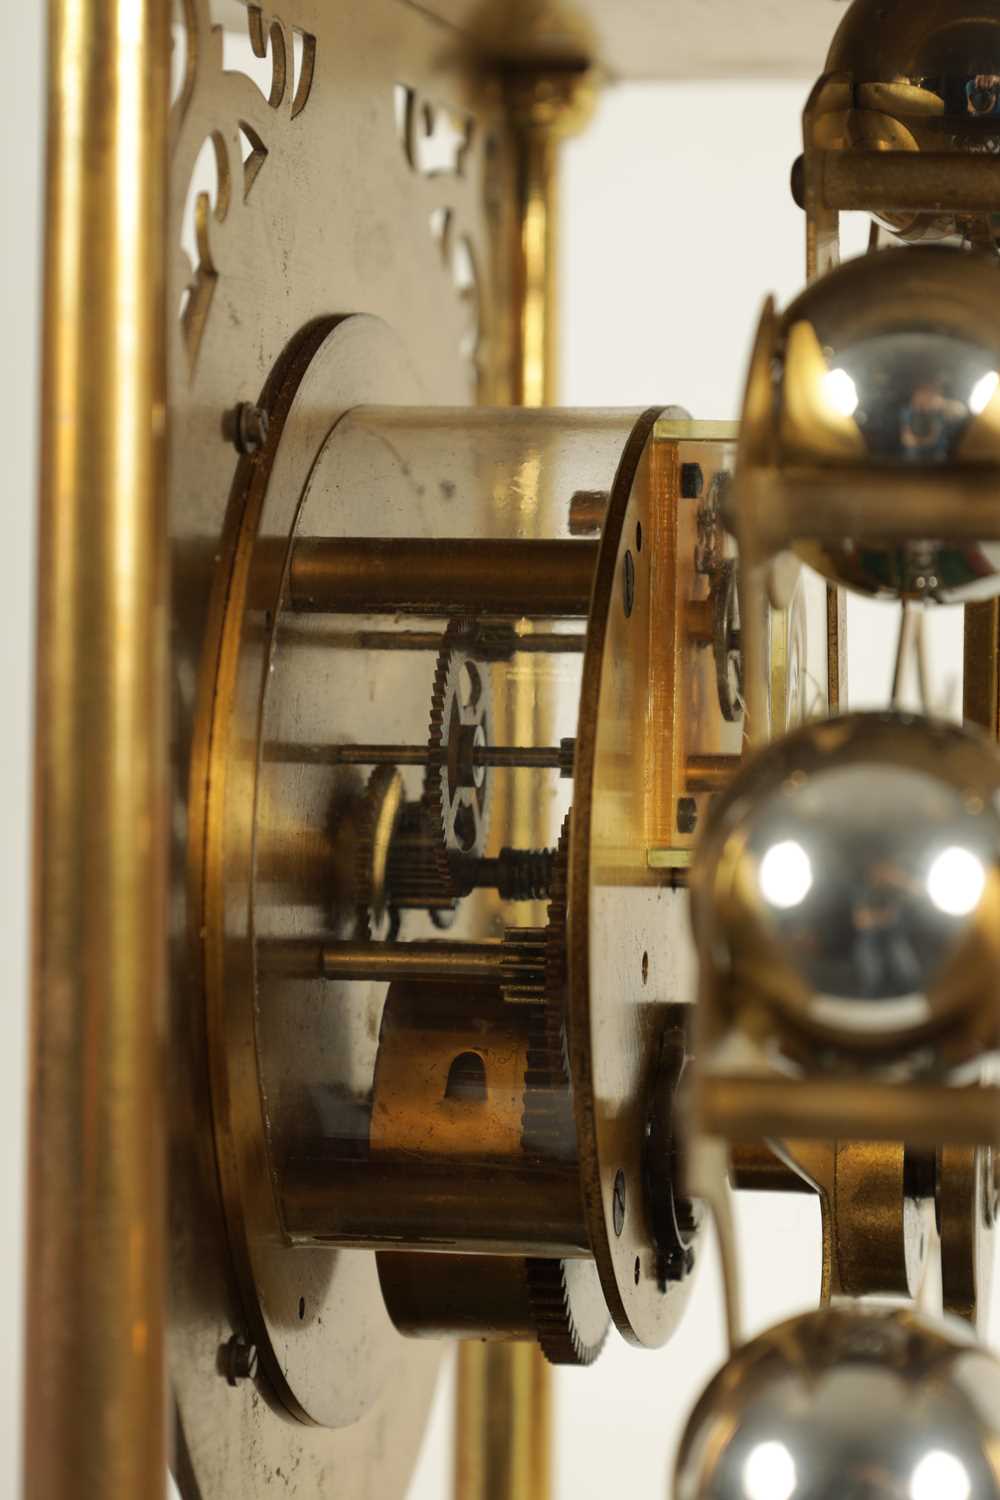 HARDING & BAZELEY, CHELTENHAM. A 20TH CENTURY LIMITED EDITION SPHERICAL BALL CLOCK - Image 7 of 14